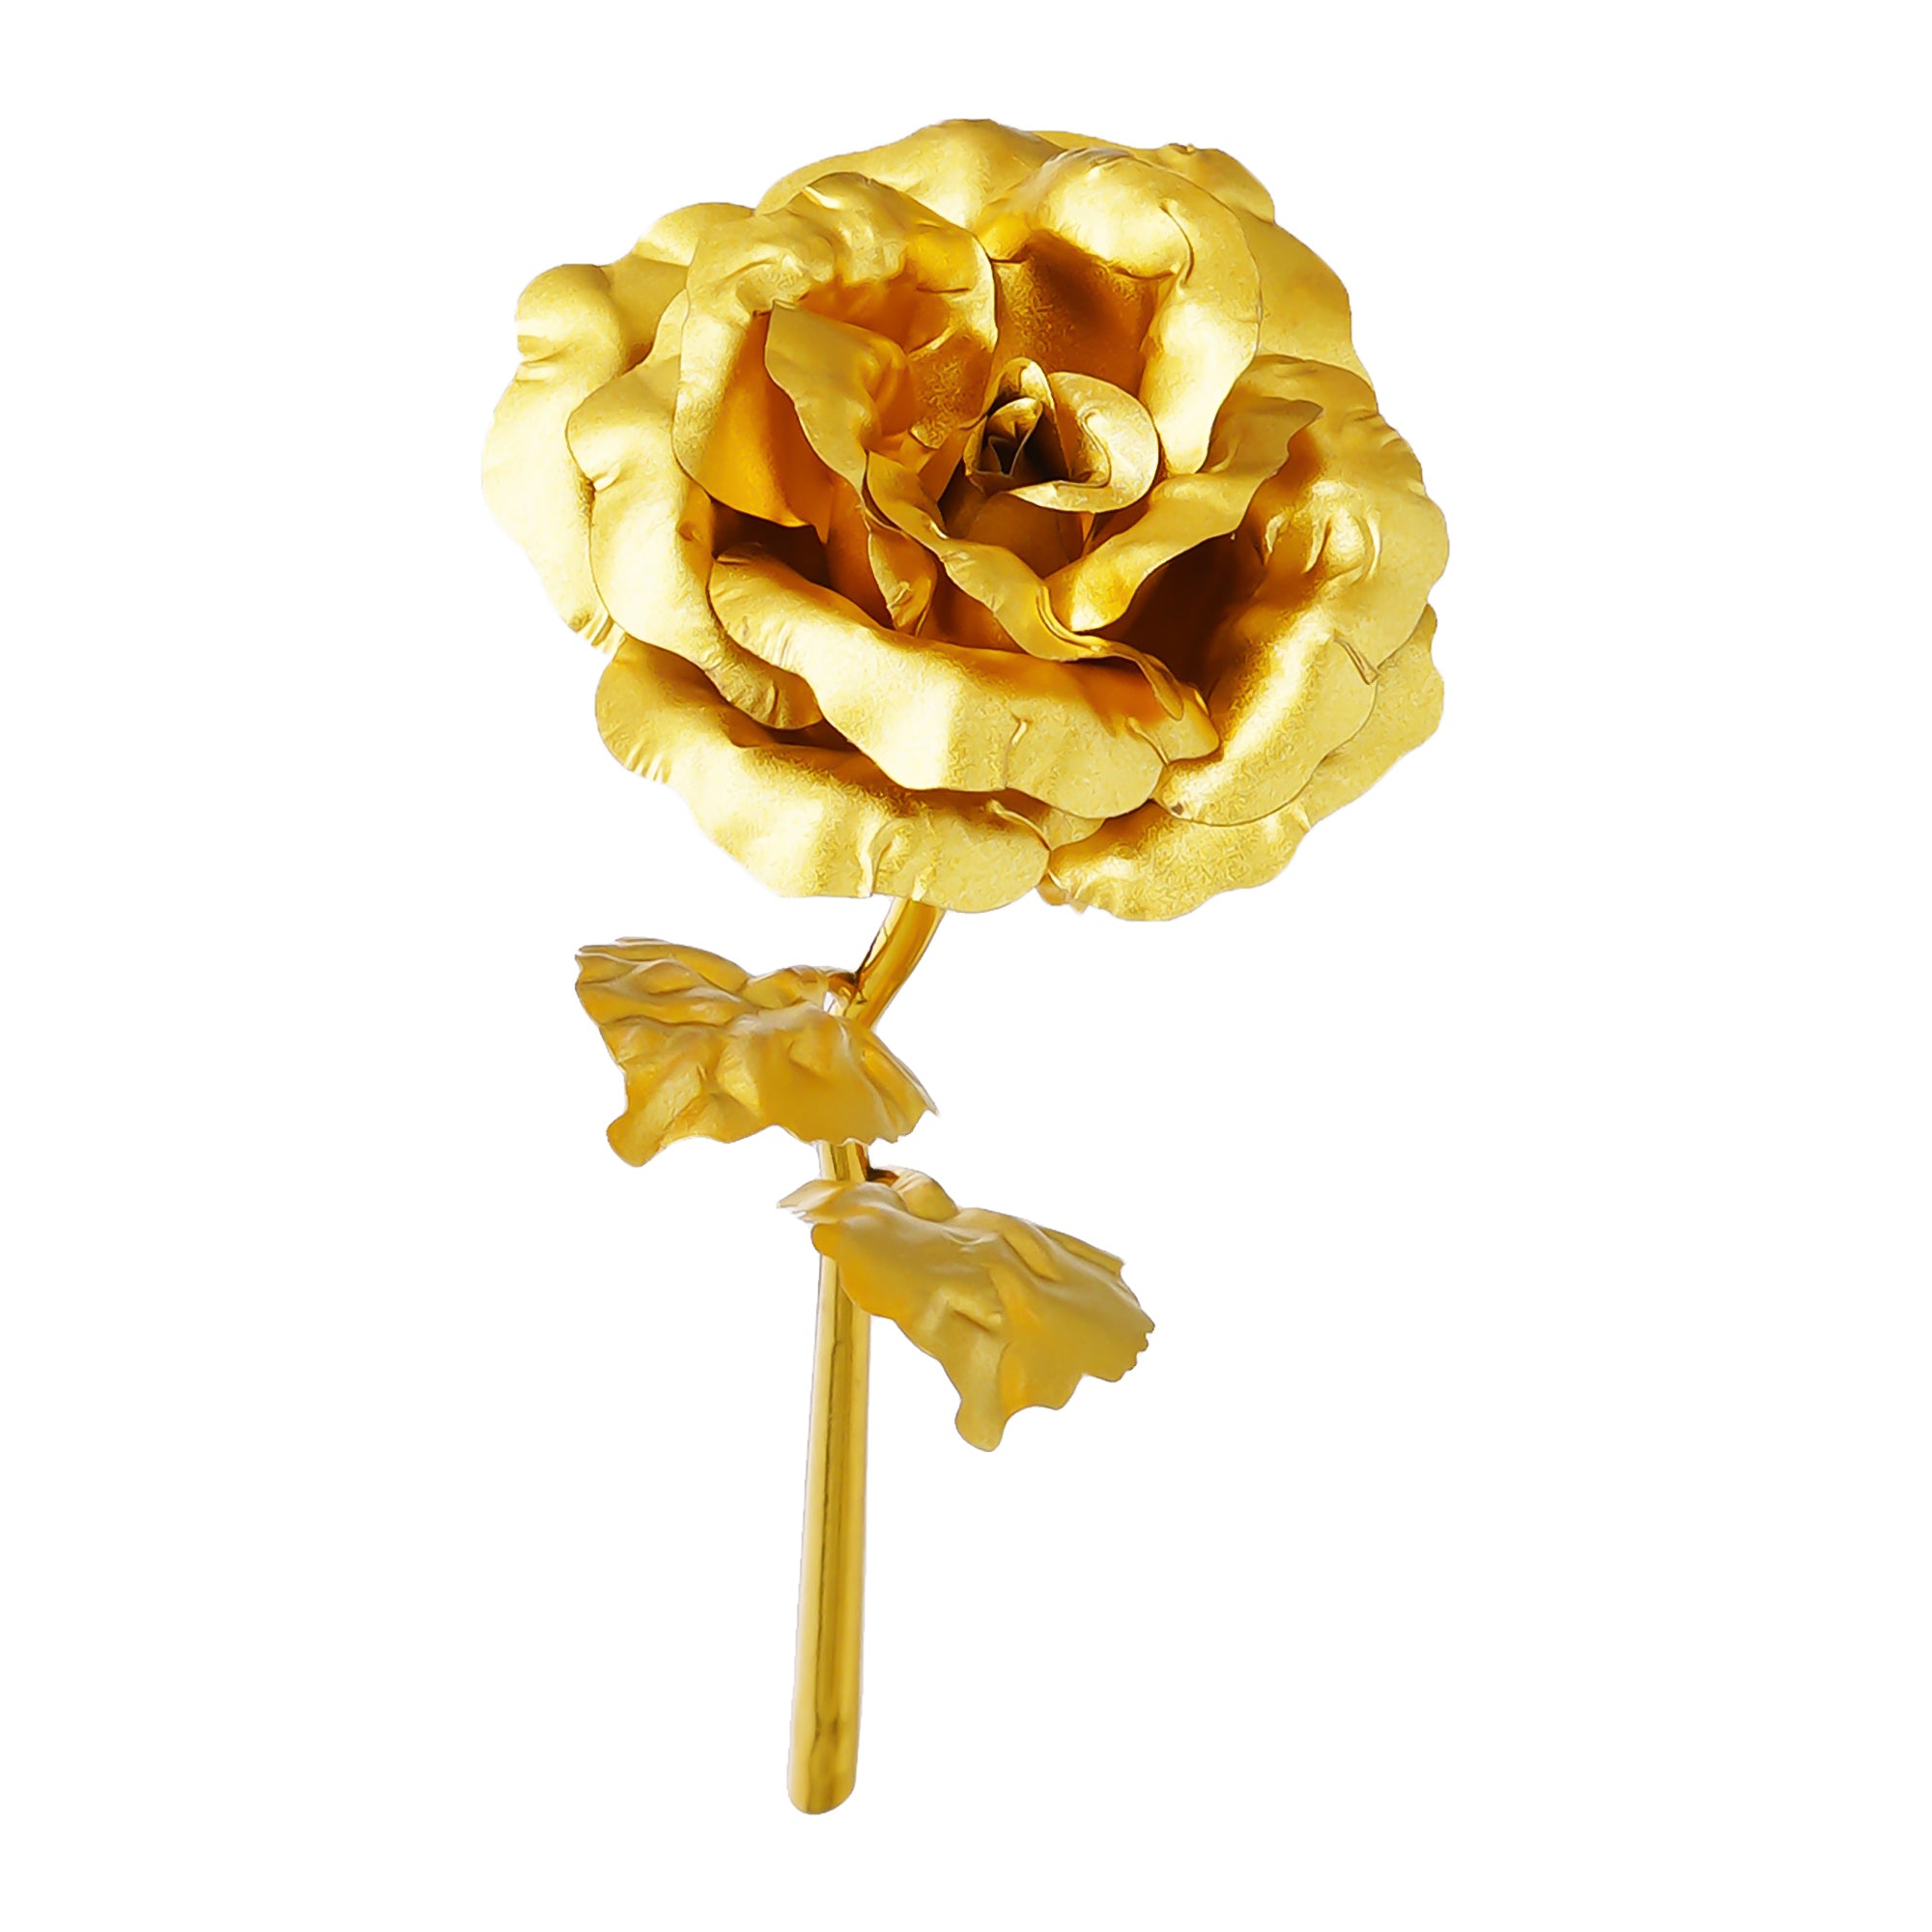 Valentine Combo of Golden Rose Gift Set, "Love You" Wooden Showpiece With Stand, Bride Kissing Groom Romantic Polyresin Decorative Showpiece 7